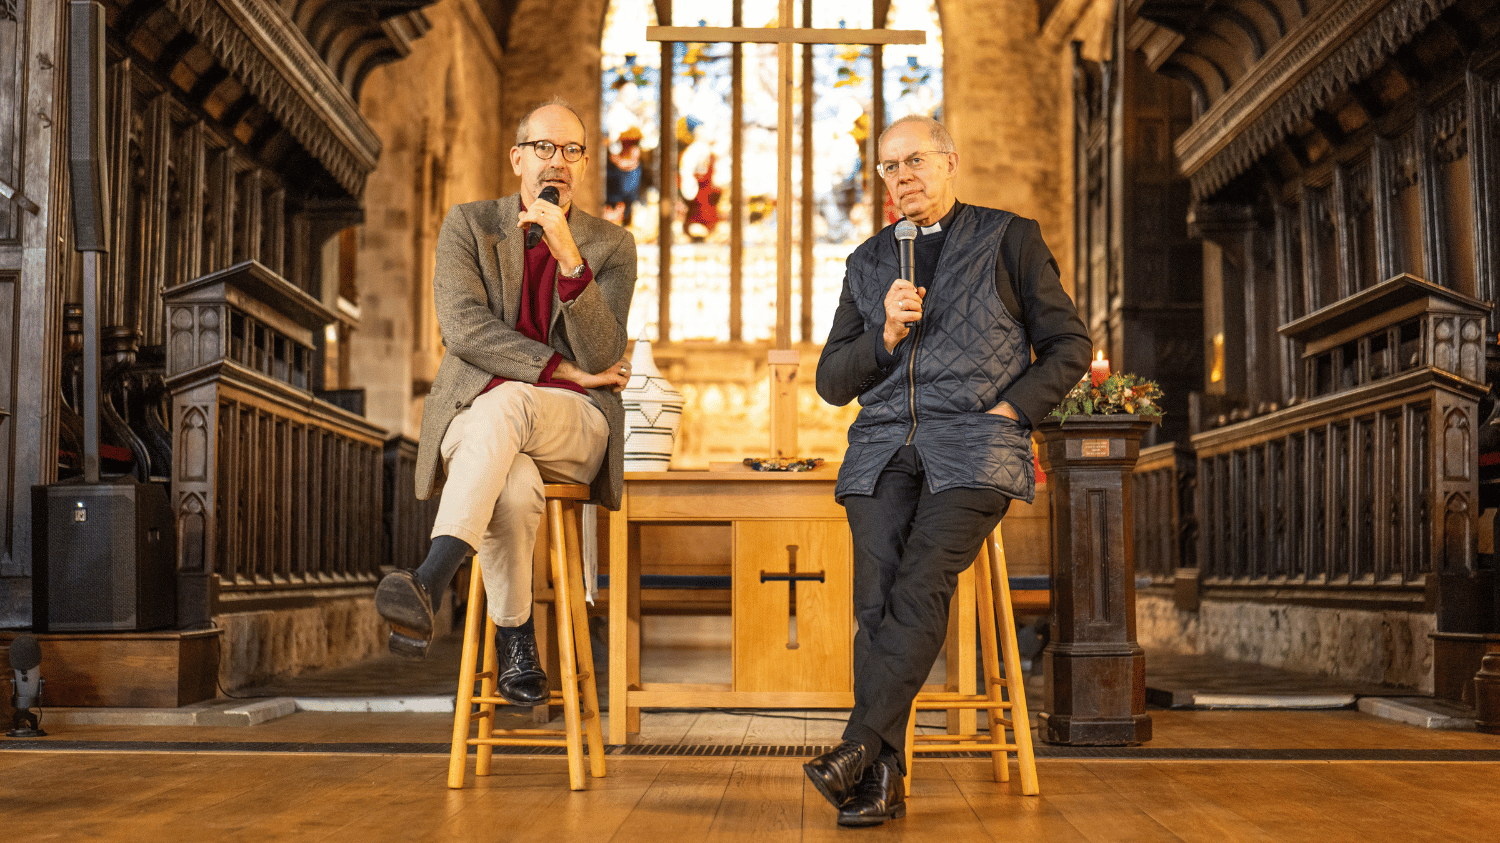 The Bishop of Hereford in conversation with the Archbishop of Canterbury at St Peter's Church, Hereford